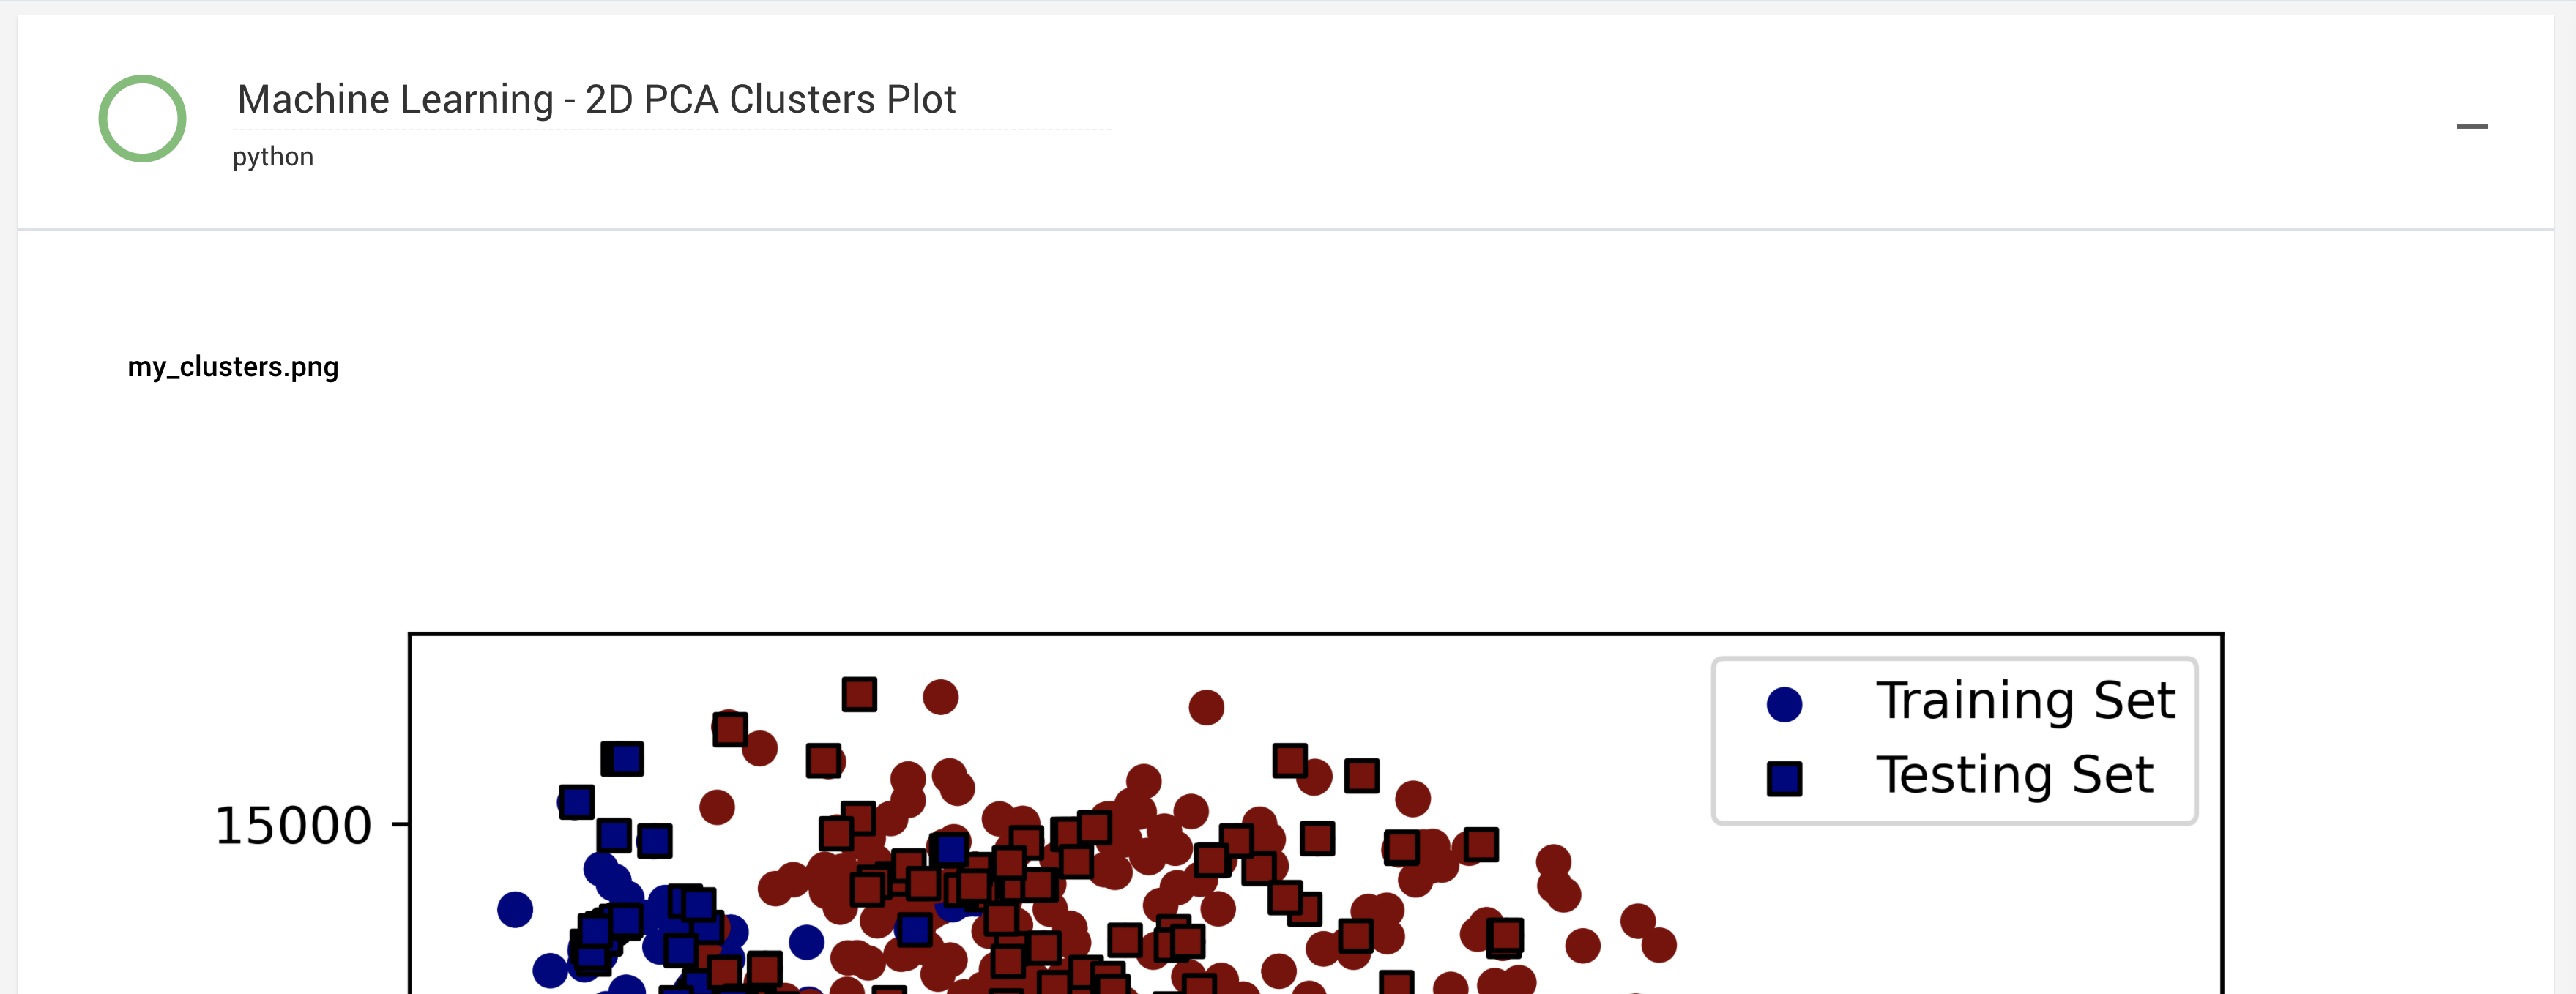 Results Tab Showcasing Clusters Plot